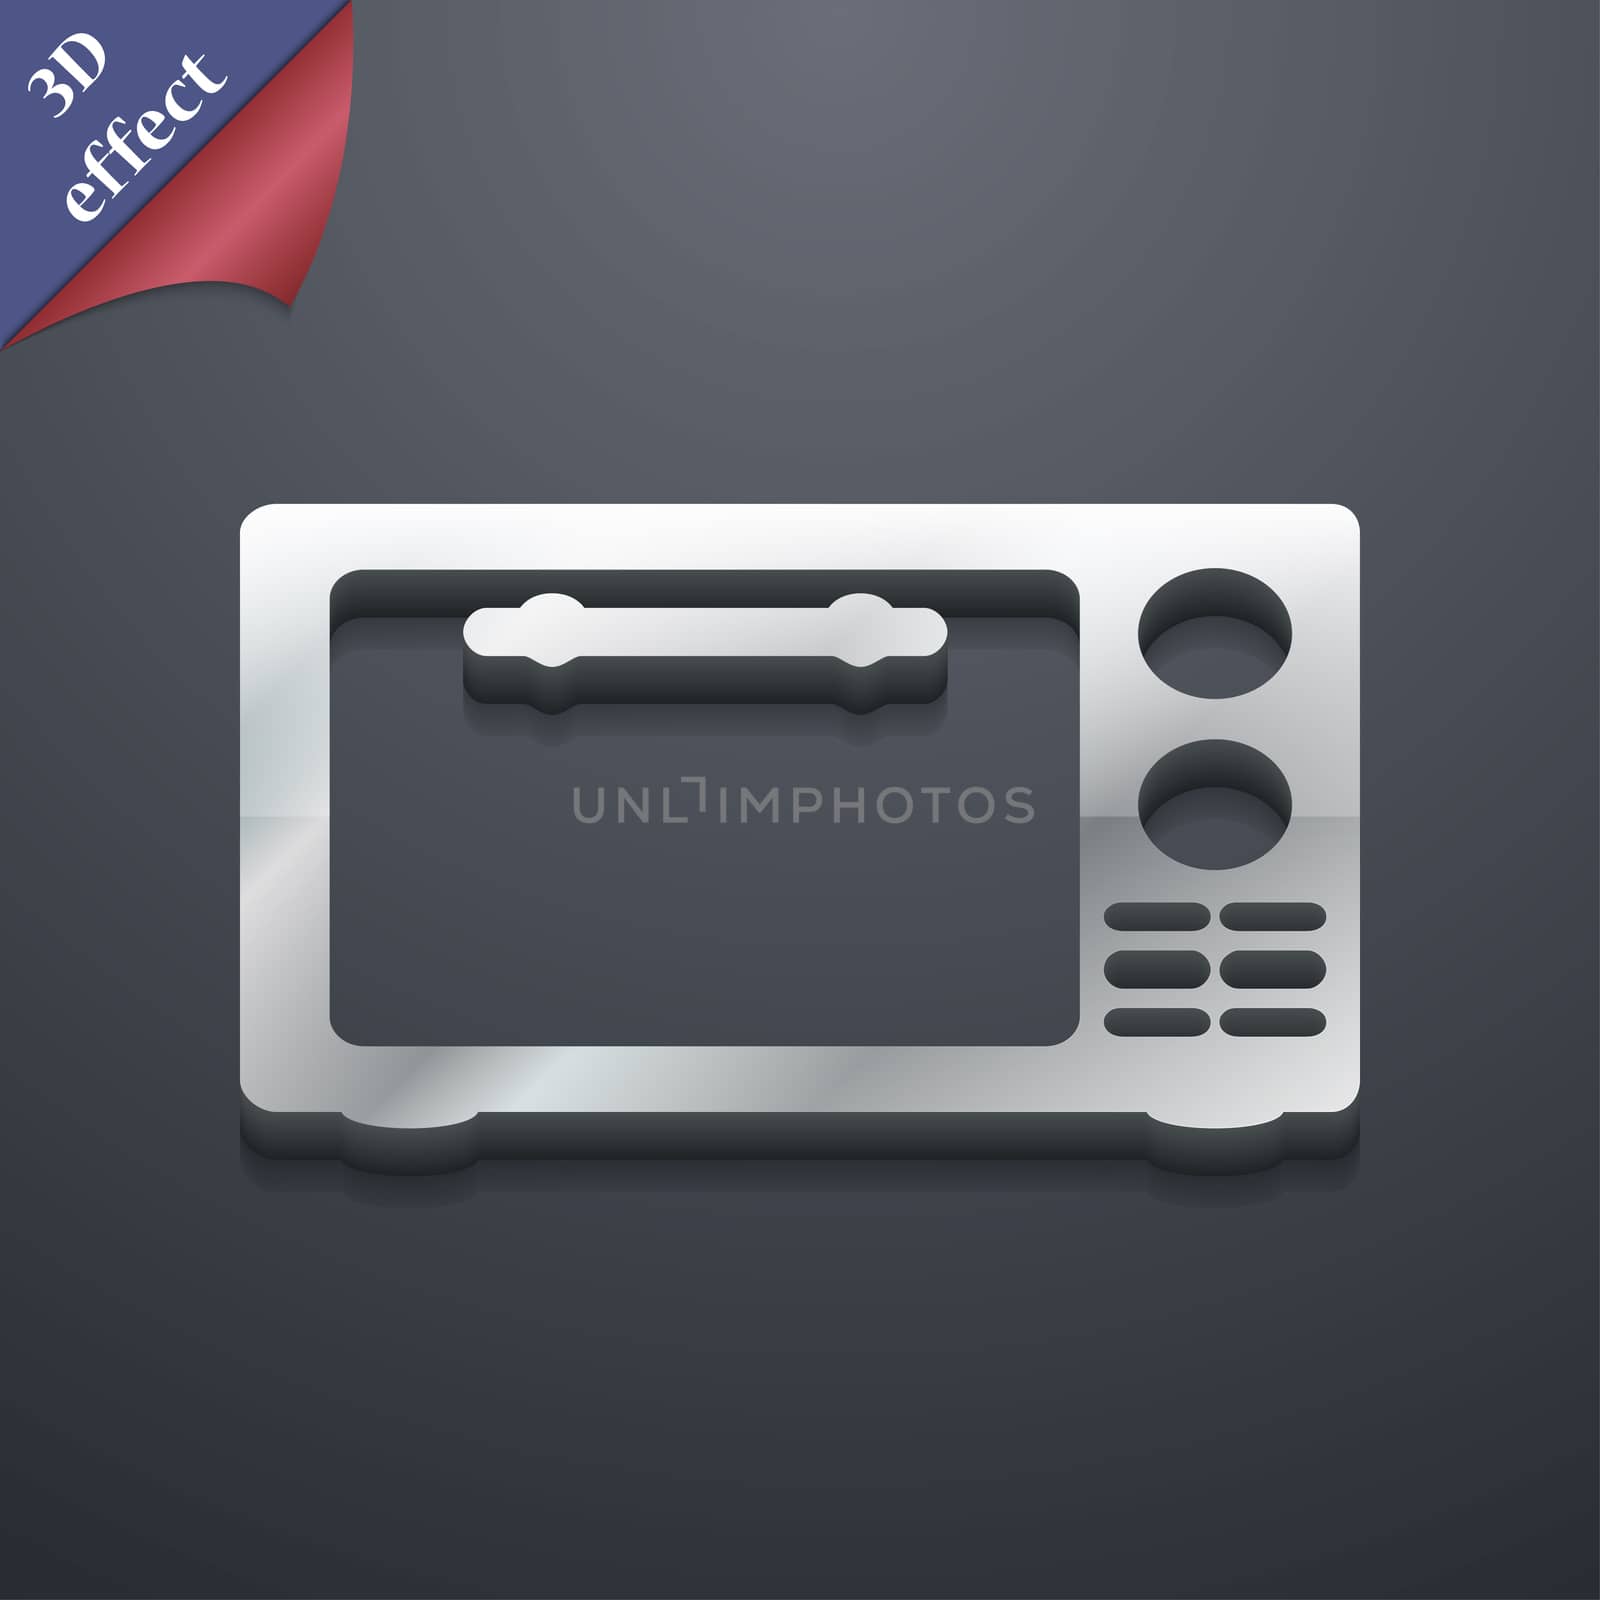 Microwave oven icon symbol. 3D style. Trendy, modern design with space for your text illustration. Rastrized copy